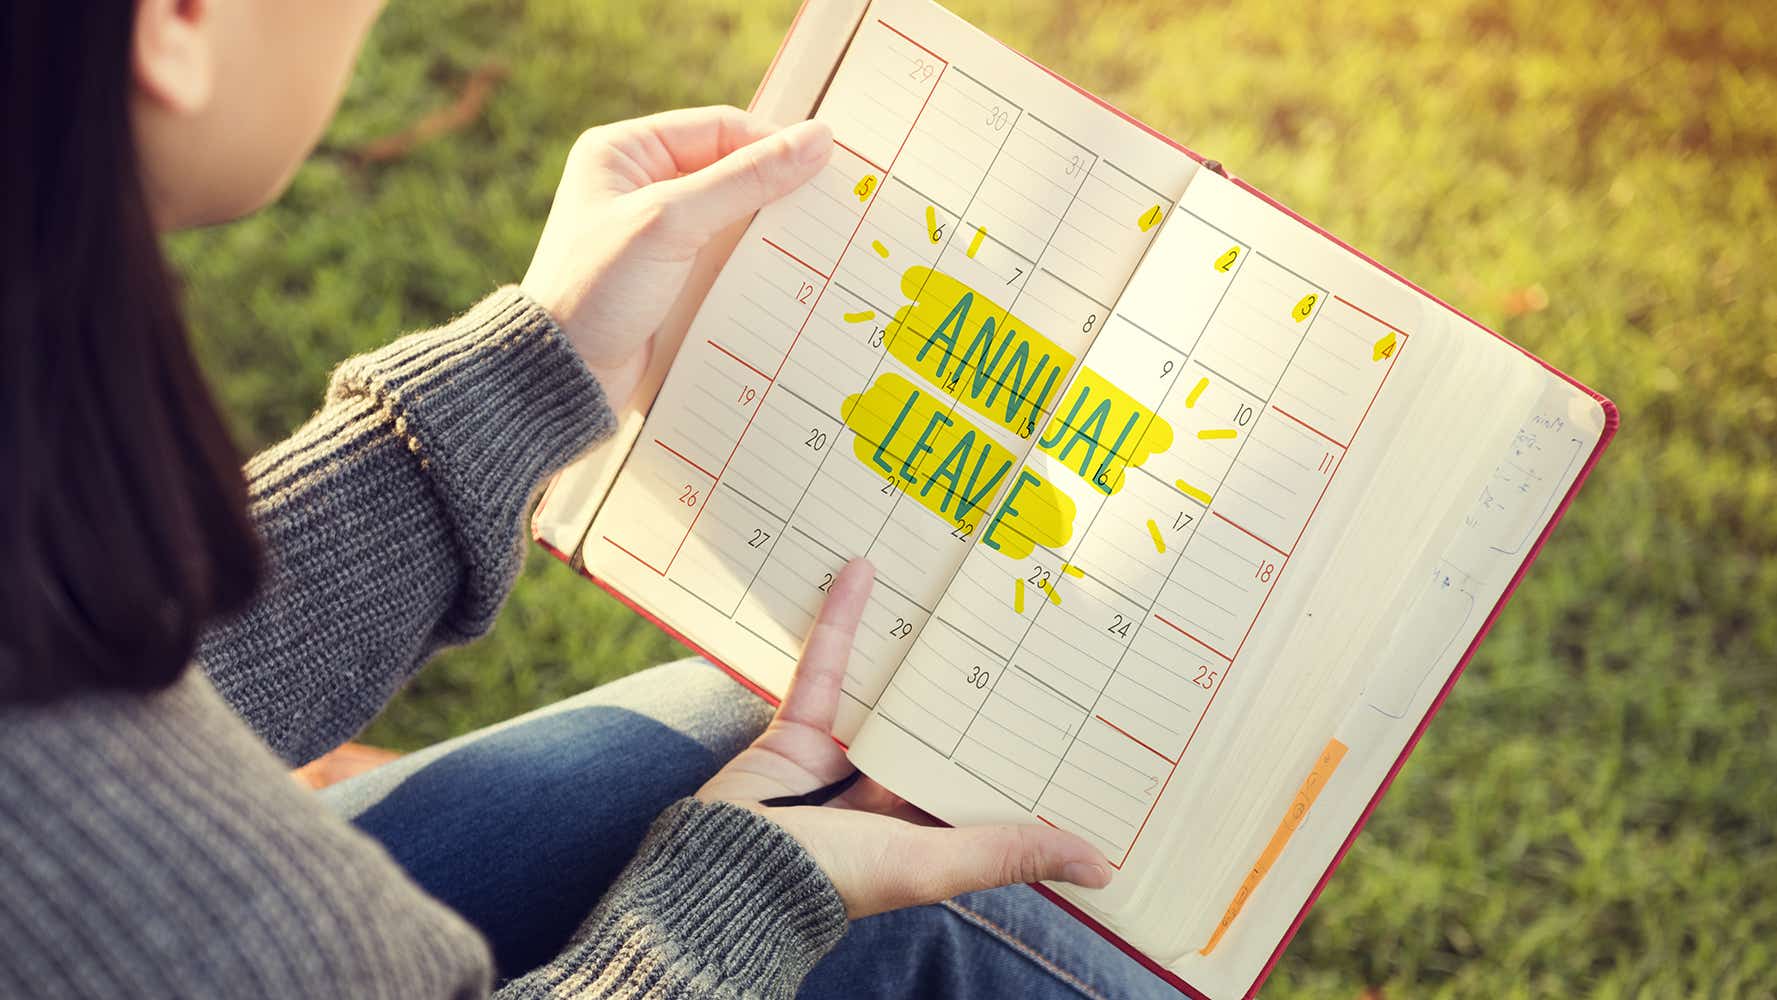 Photo of calendar or diary with annual leave highlighted